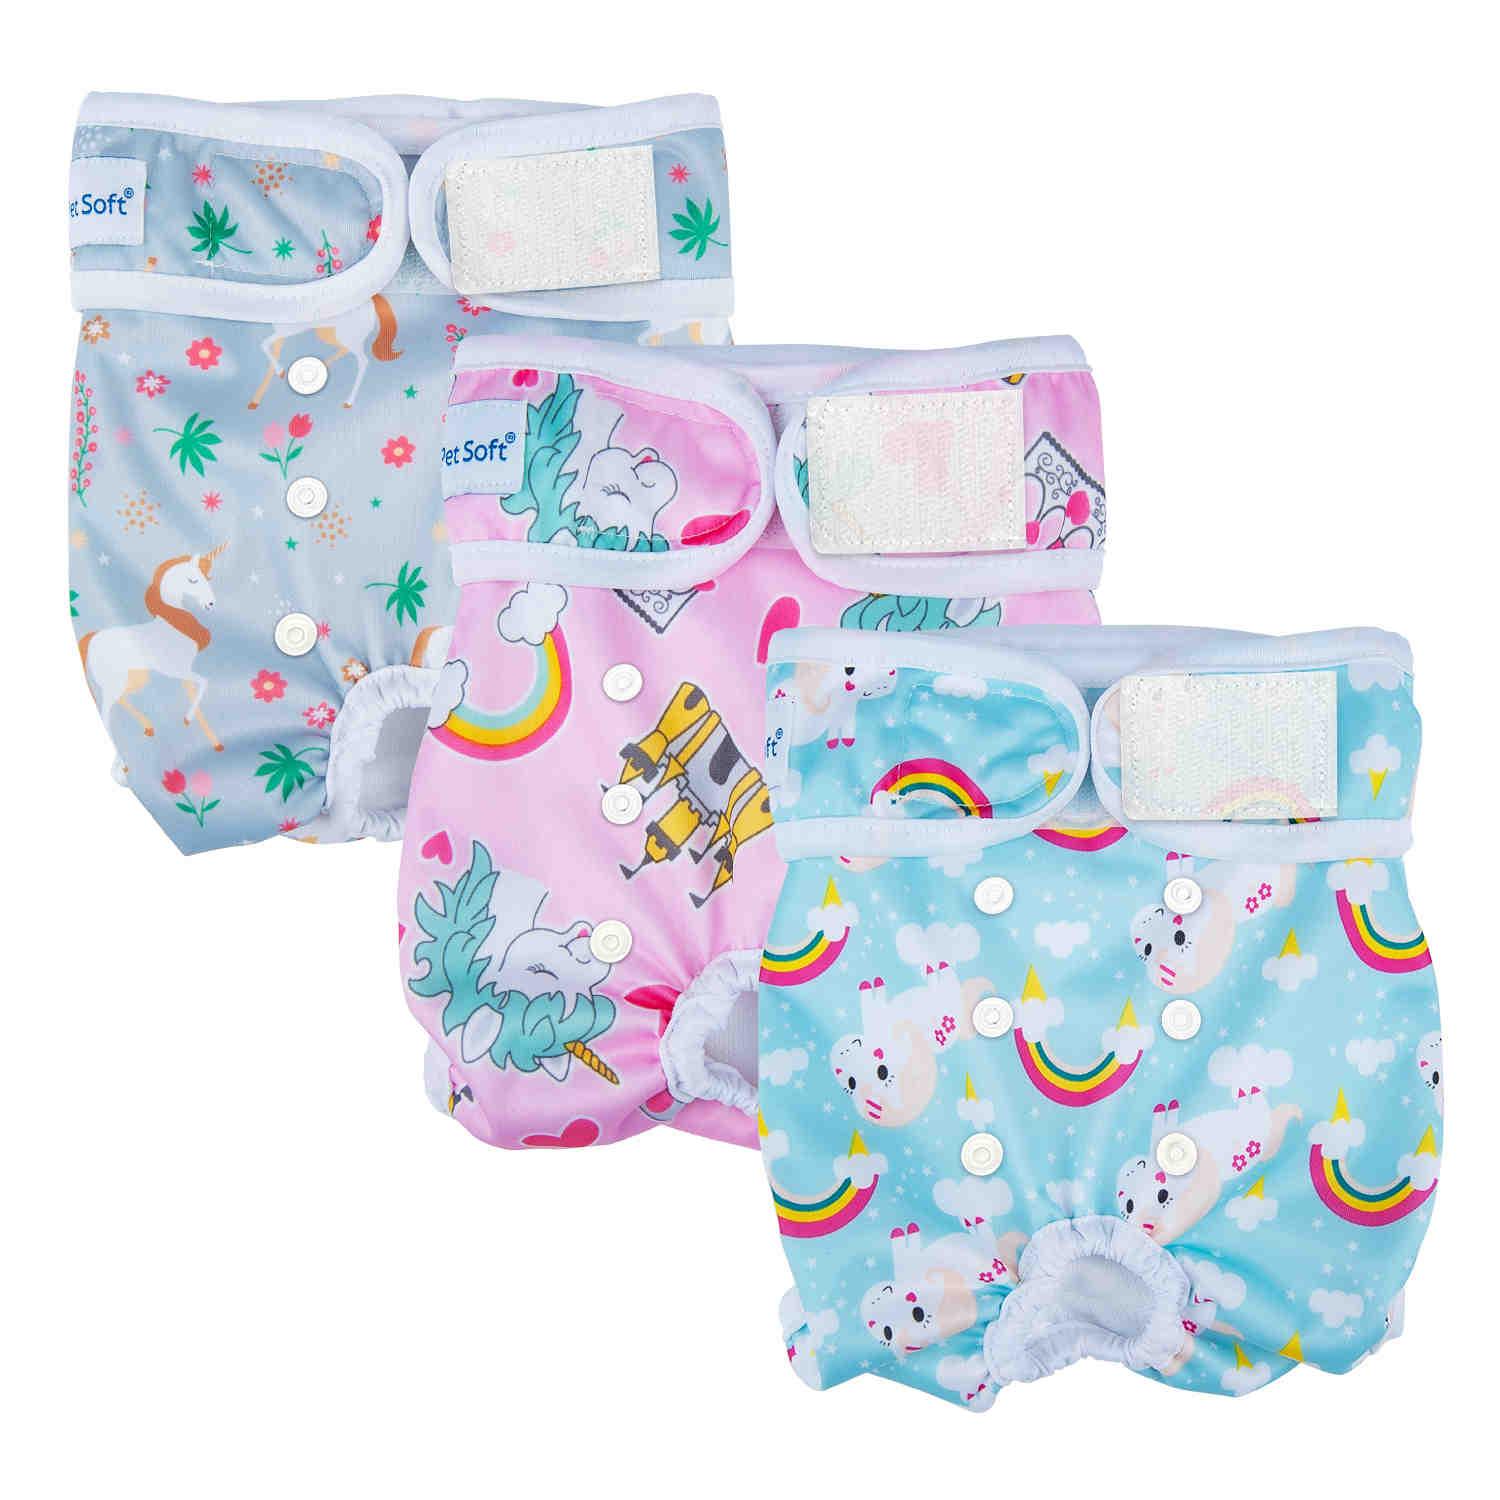 Washable Female Dog Diapers, Reusable Doggy Diapers